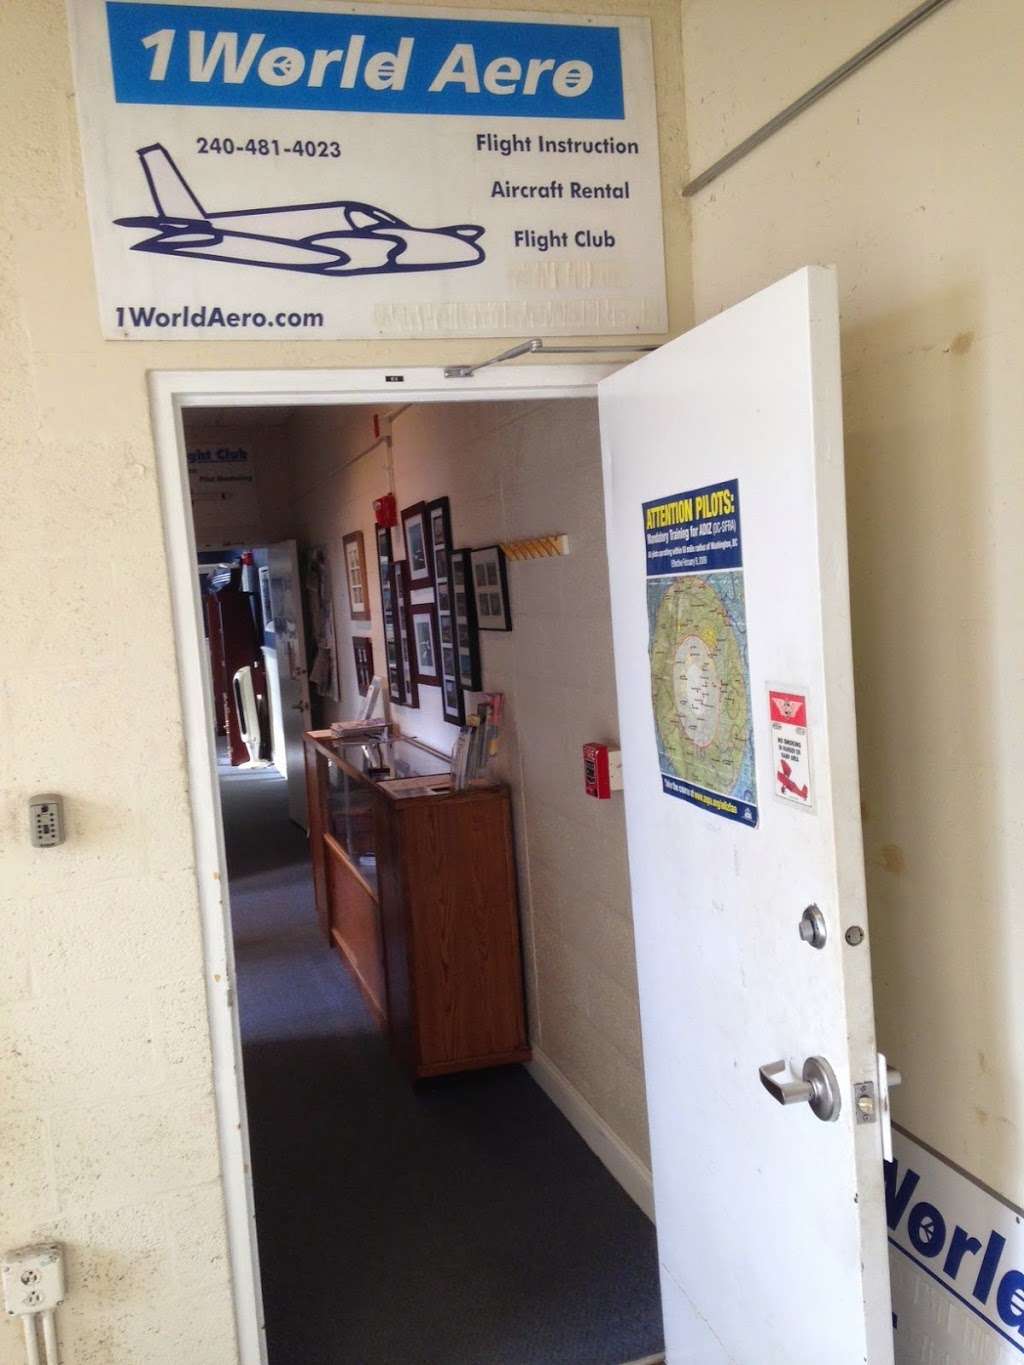 1World Aero | General Aviation Dr, Fort Meade, MD 20755 | Phone: (240) 481-4023